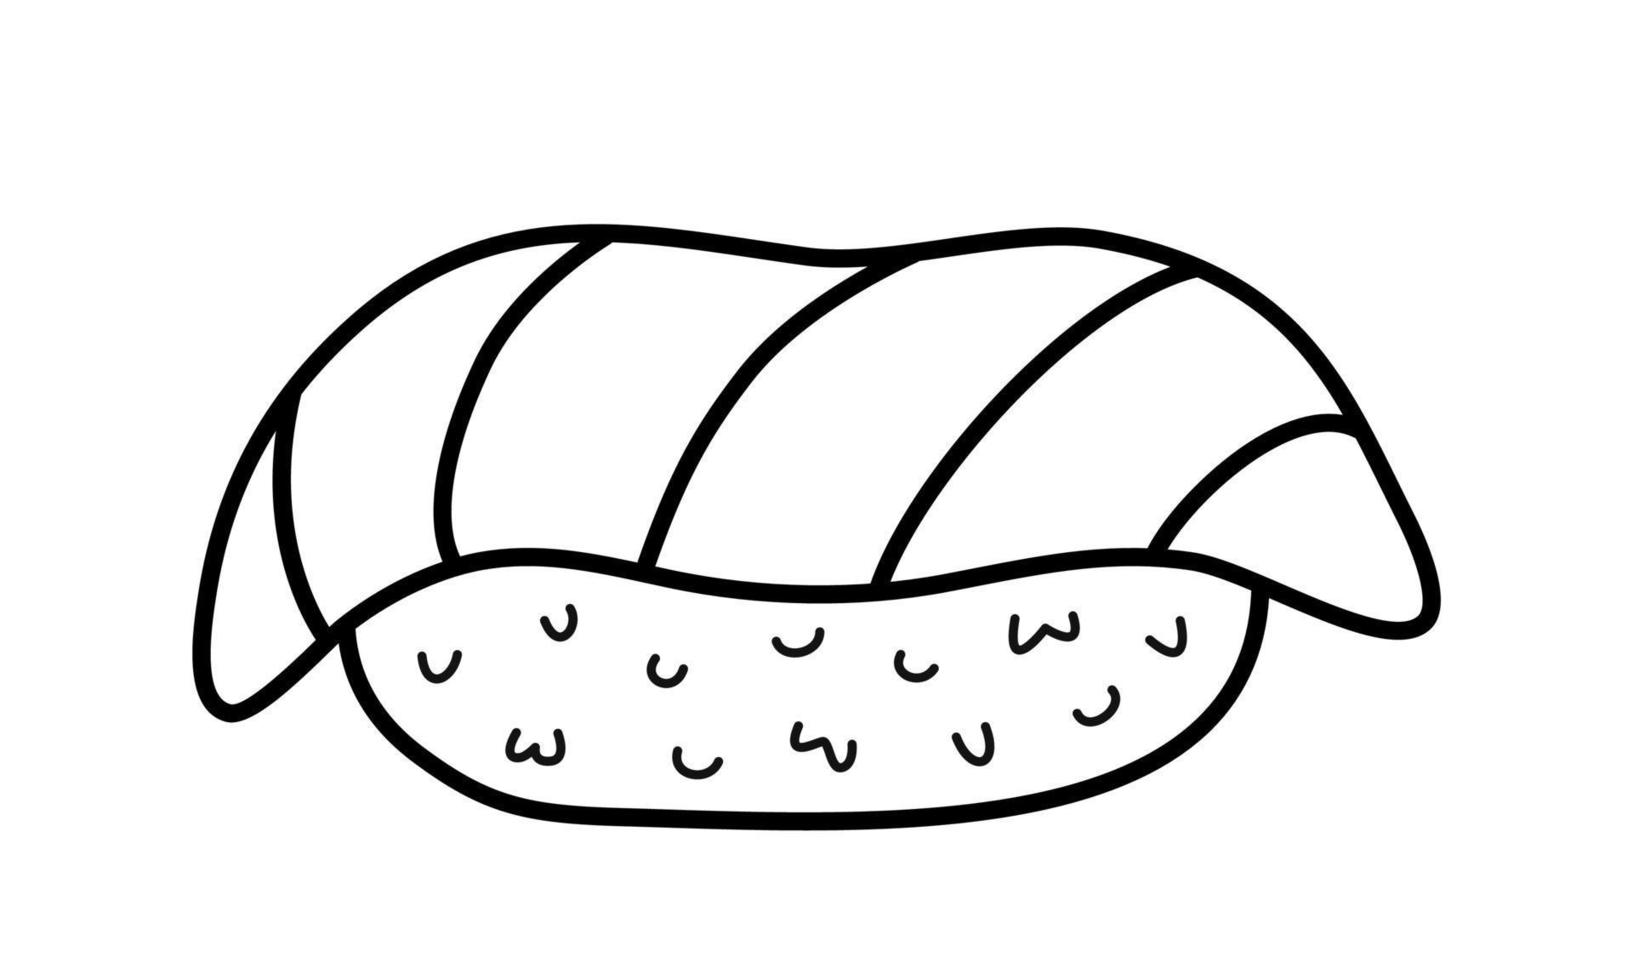 Nigiri sushi with salmon. Japanese cuisine. Hand drawn traditional food element icon. Isolated vector illustration in doodle line style.